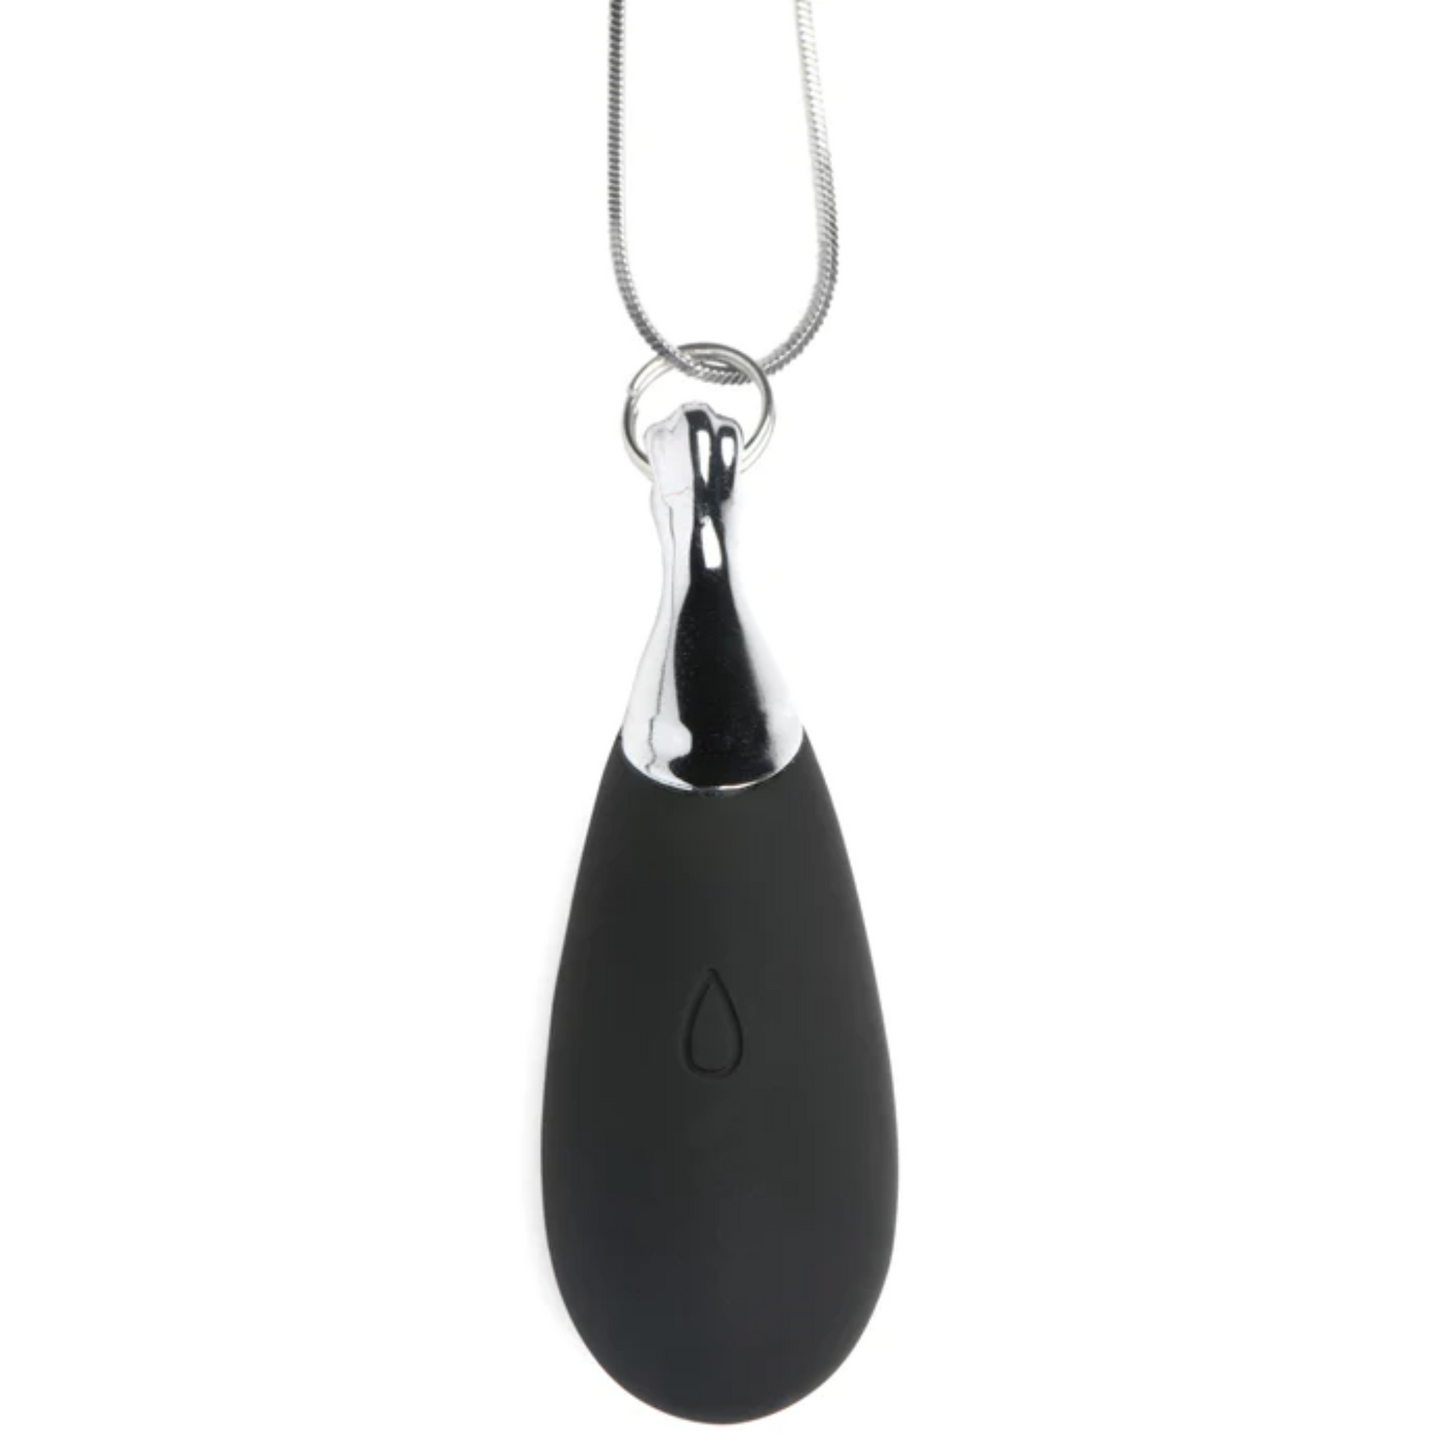 Charmed - 10X Vibrating Silicone Teardrop Necklace - Black/Silver